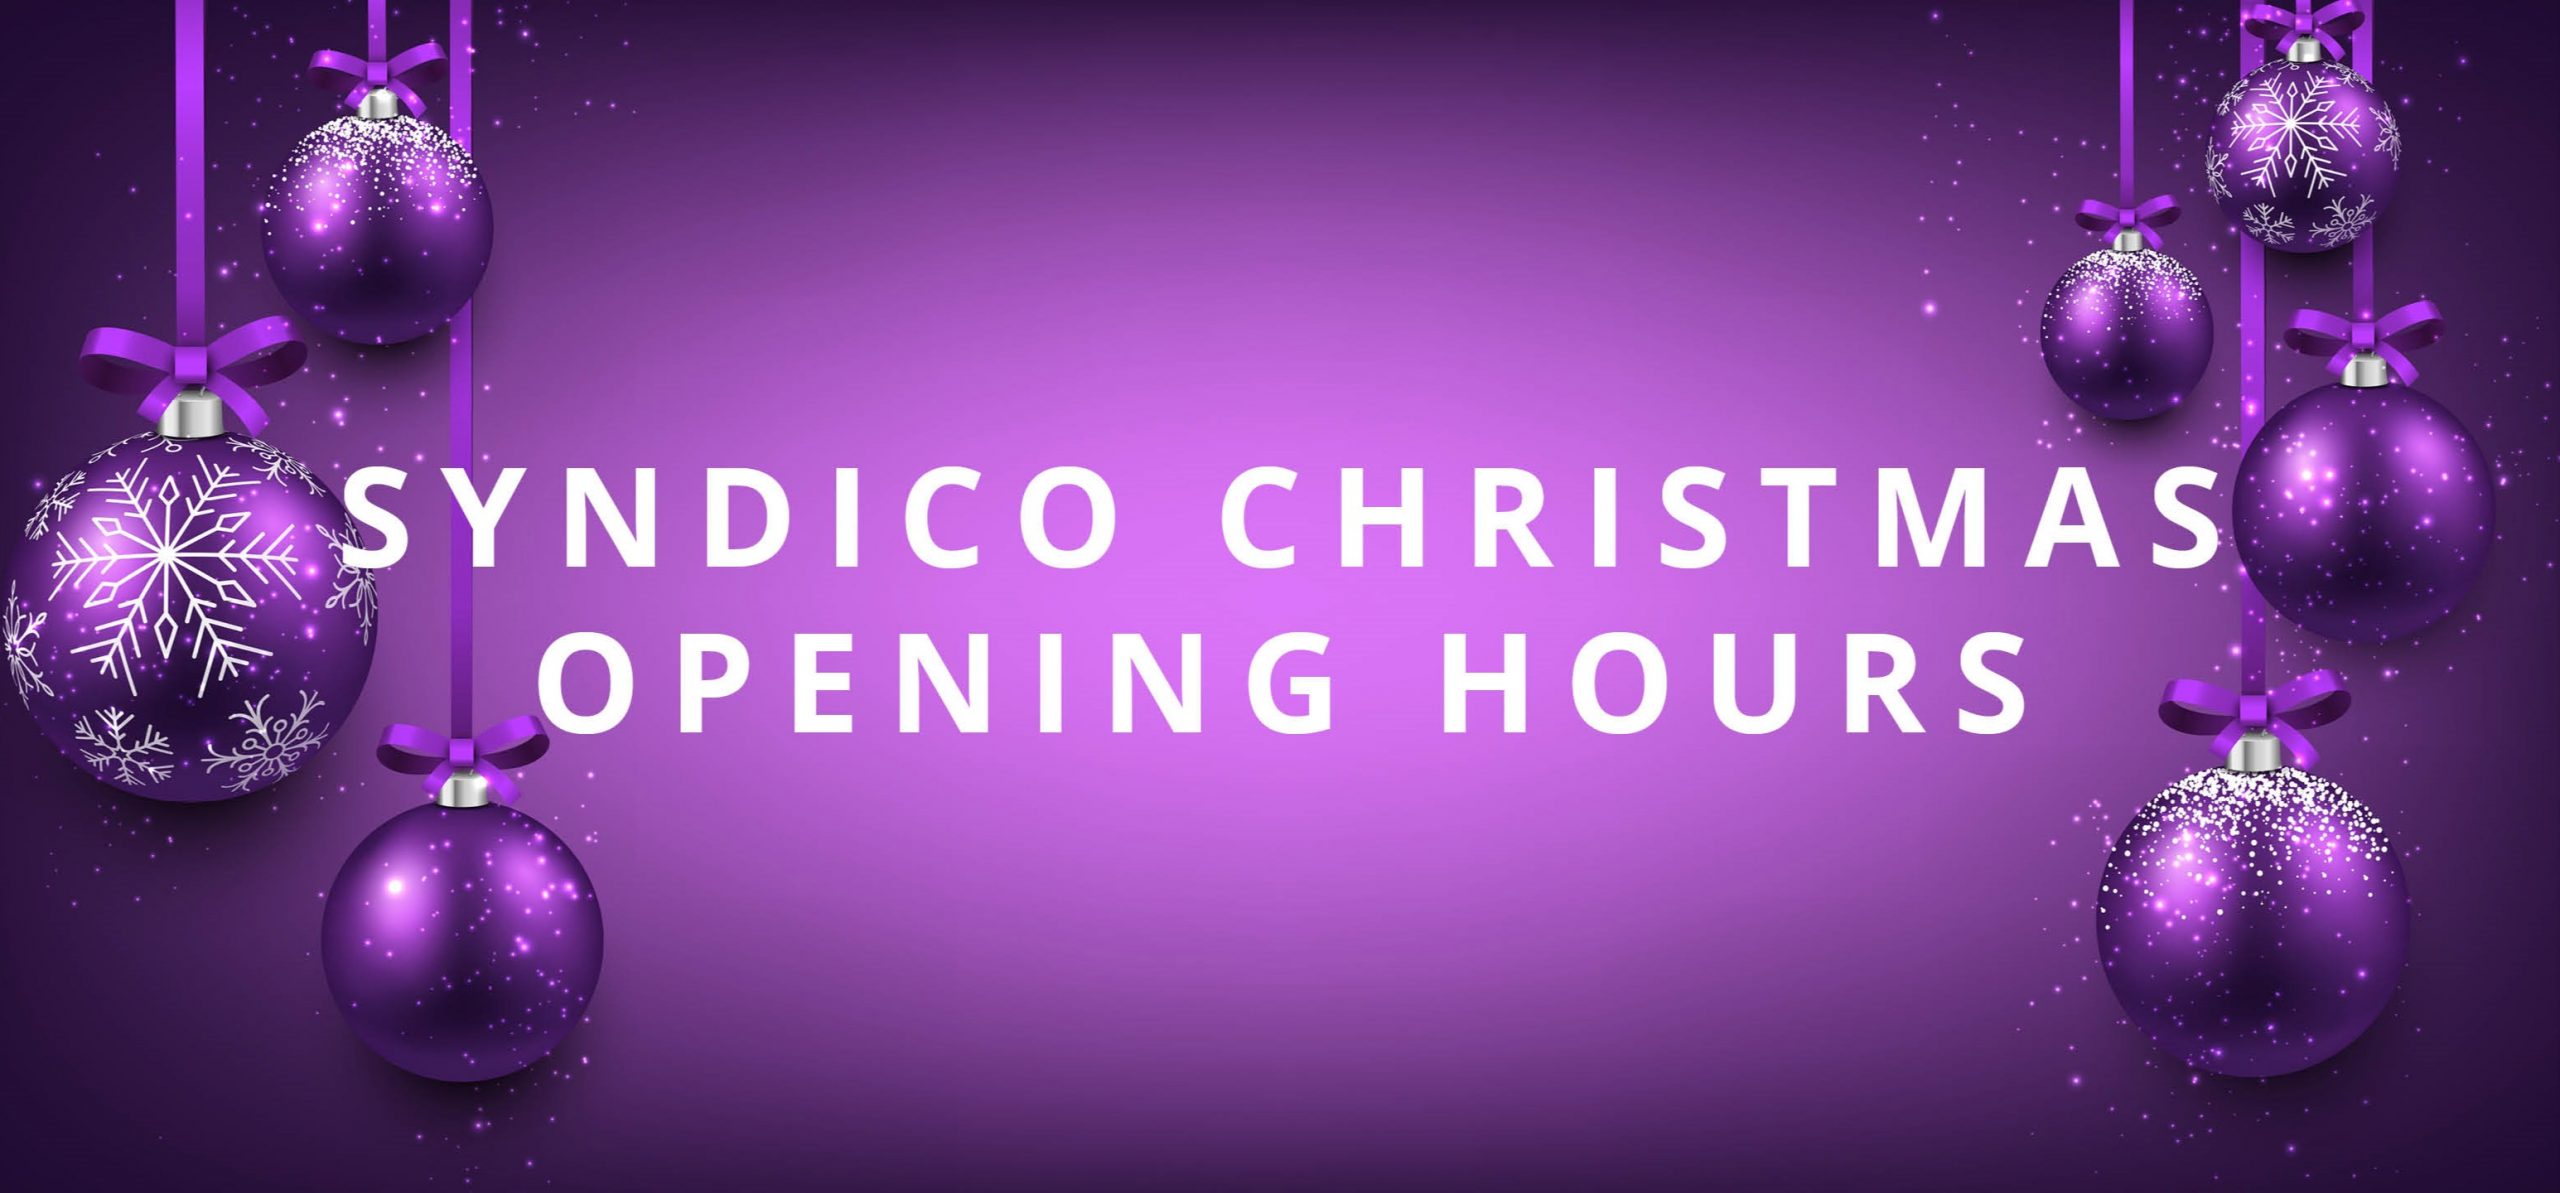 Syndico Christmas Opening Hours